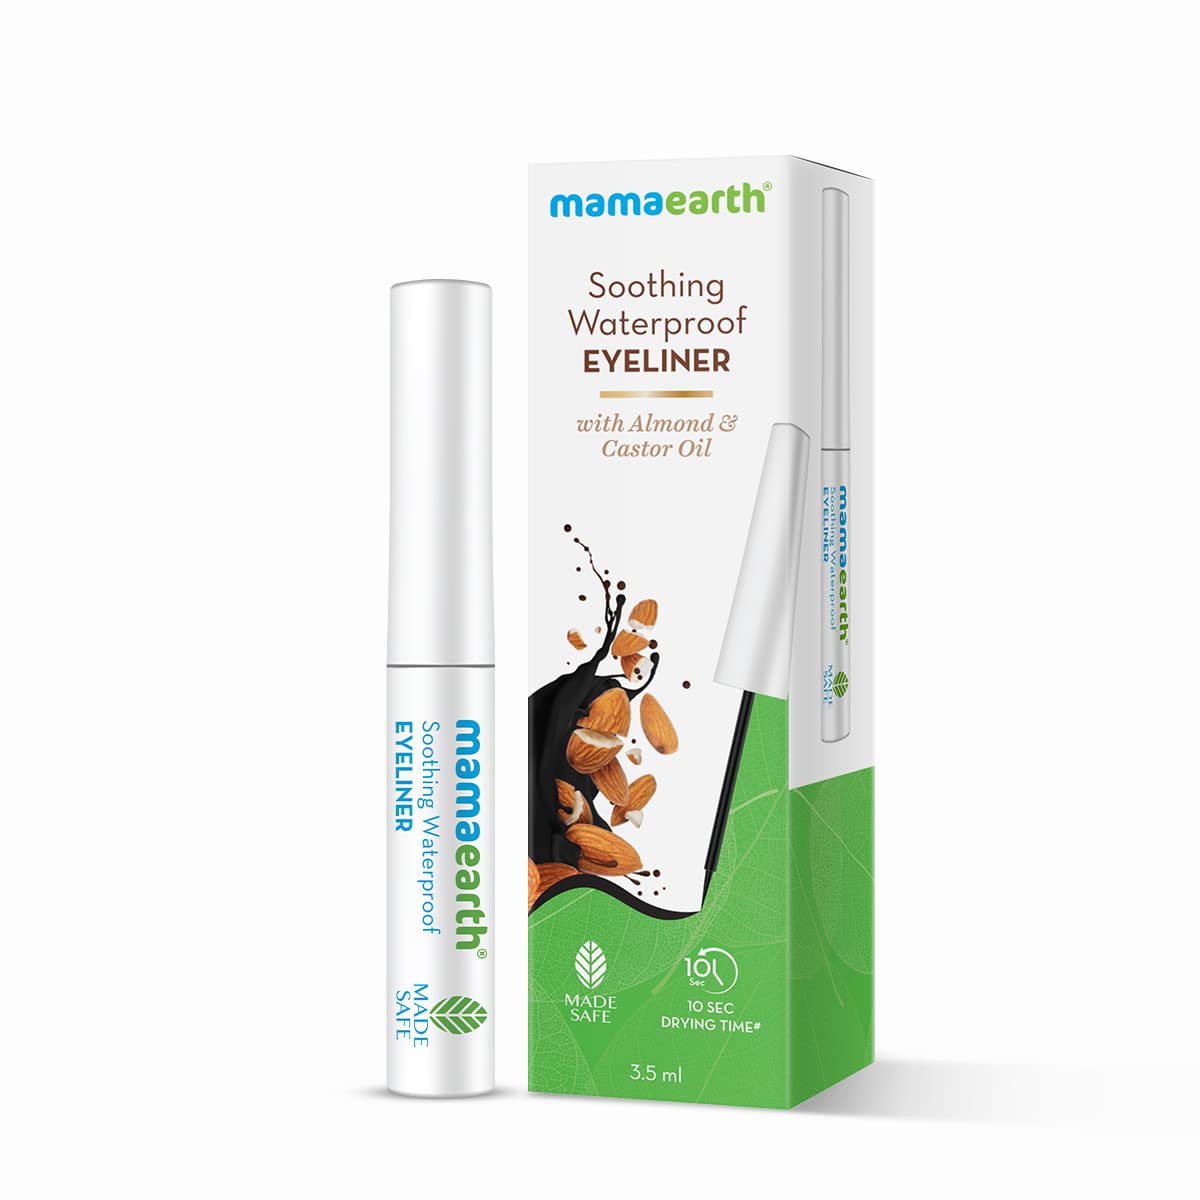 mamaearth-soothing-waterproof-eyeliners-with-almond-oil-and-castor-oil